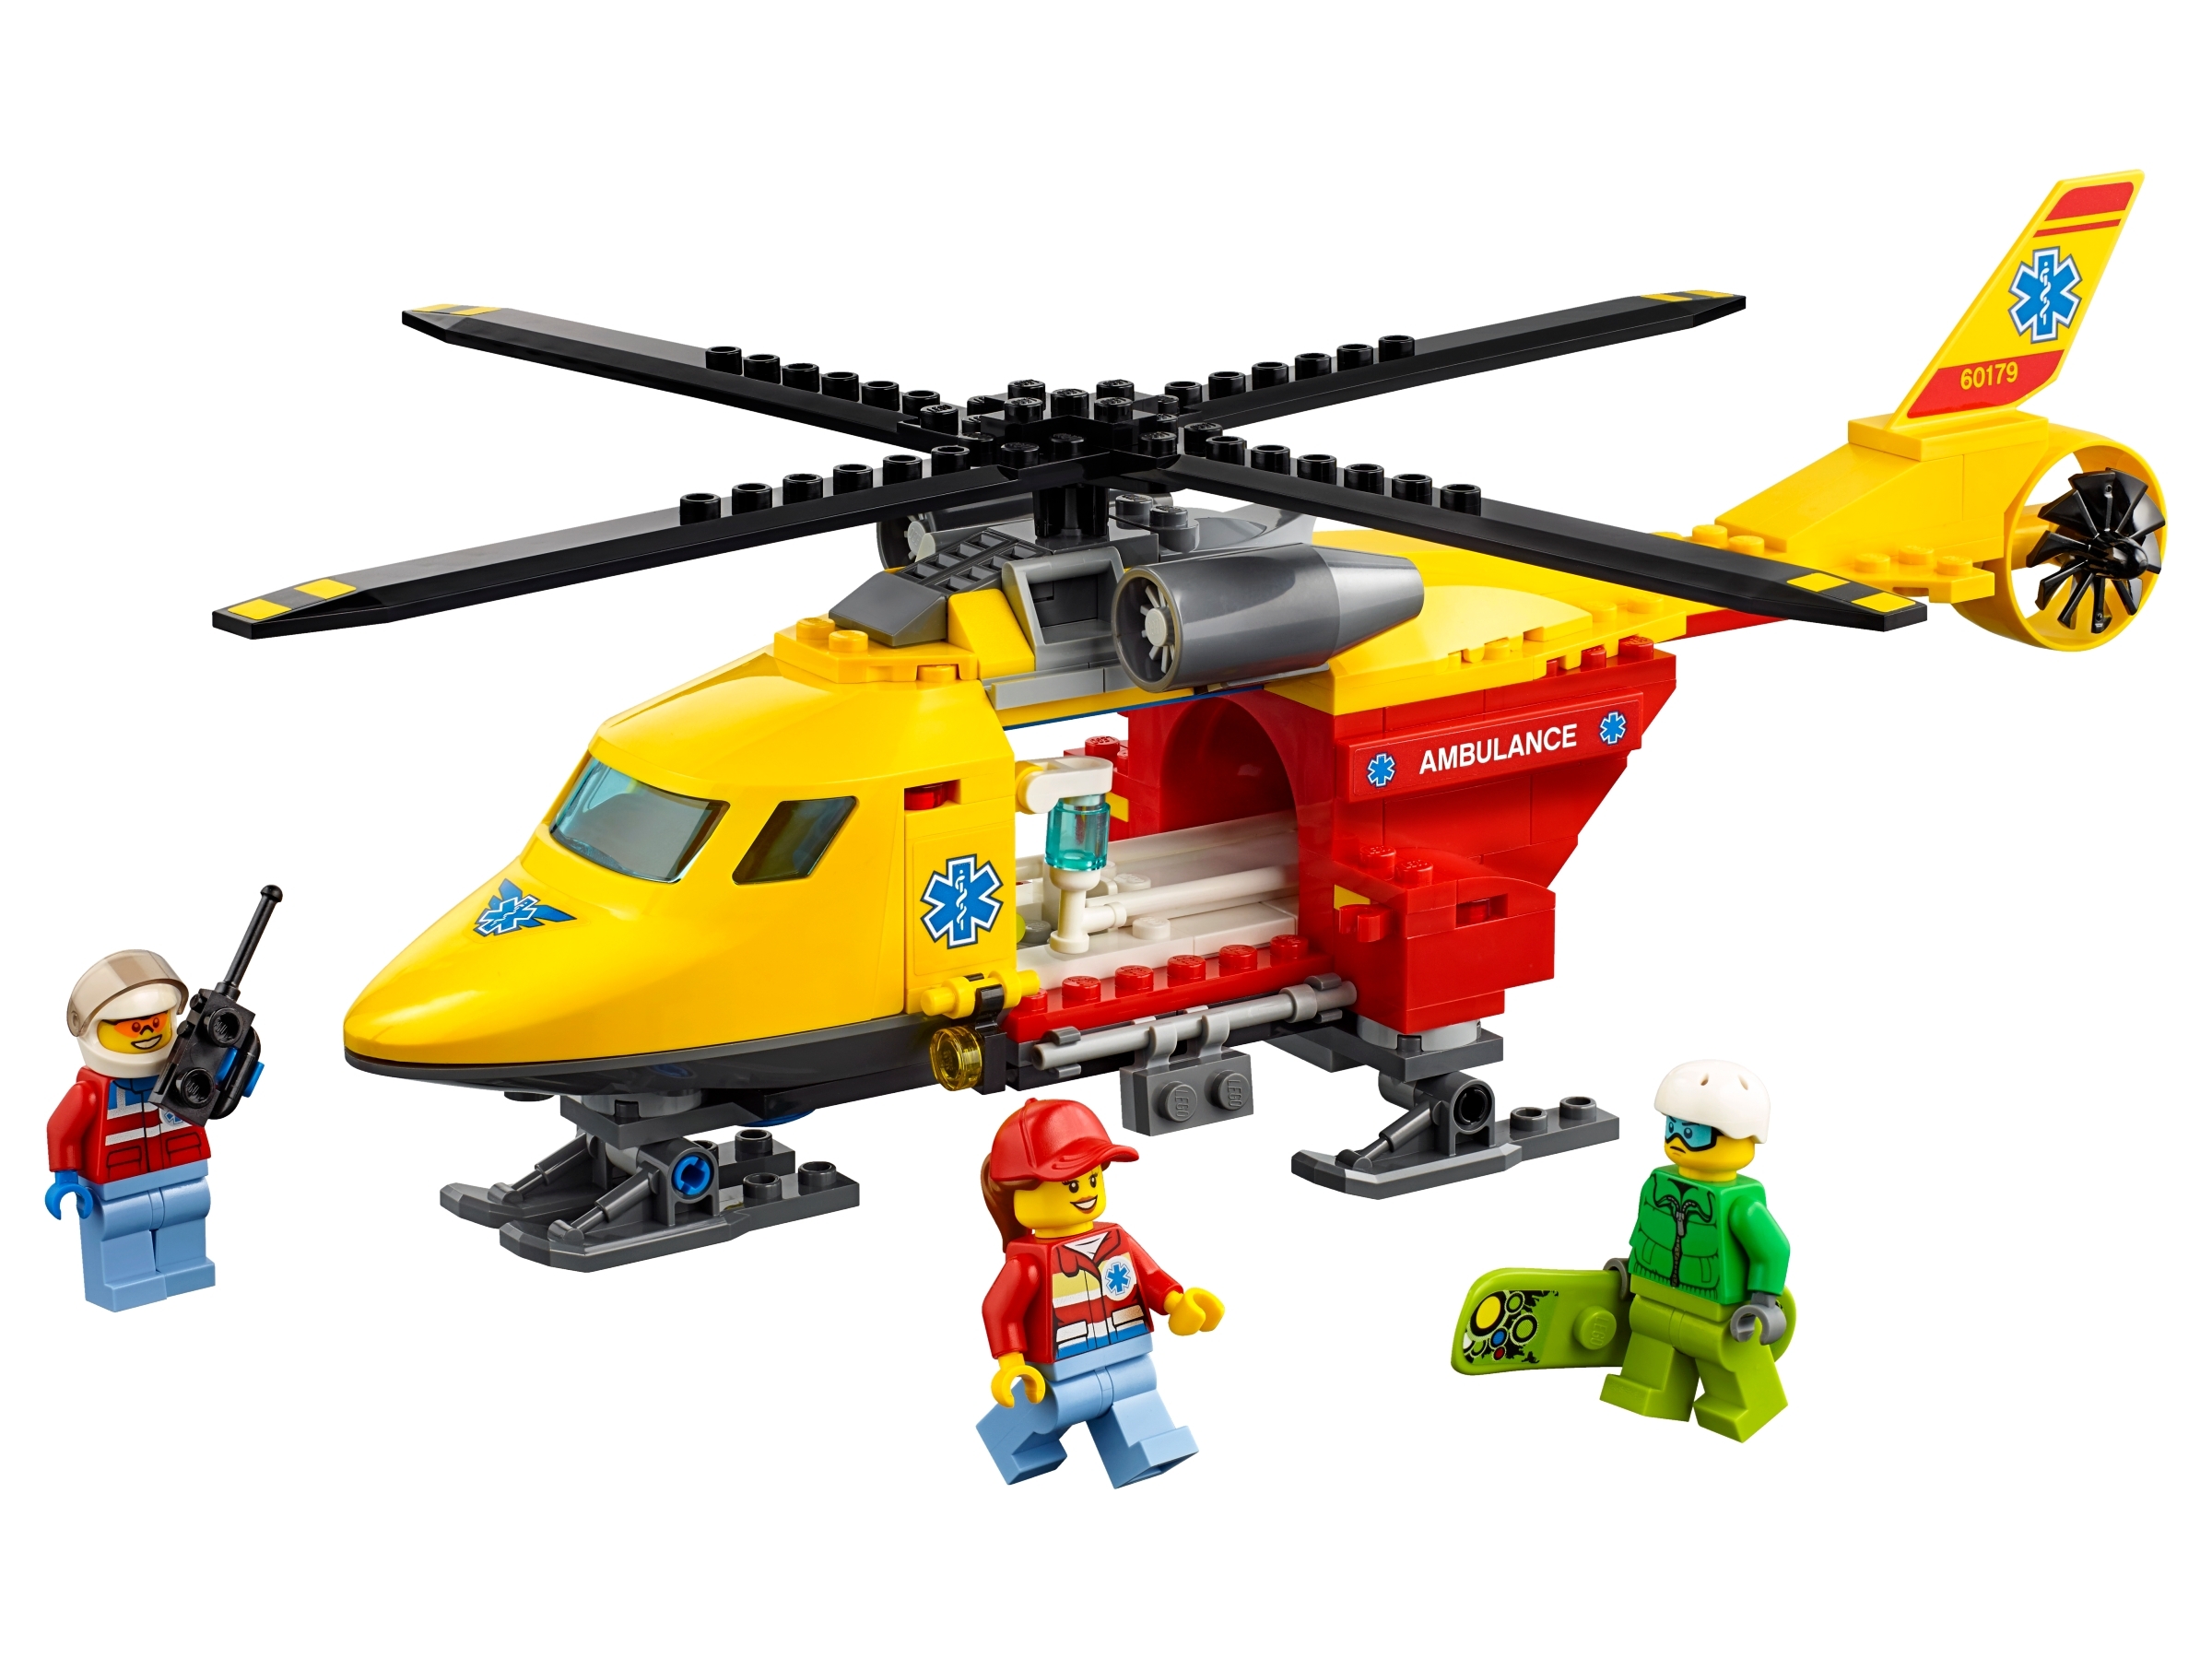 astronaut Sidelæns En trofast Ambulance Helicopter 60179 | City | Buy online at the Official LEGO® Shop US